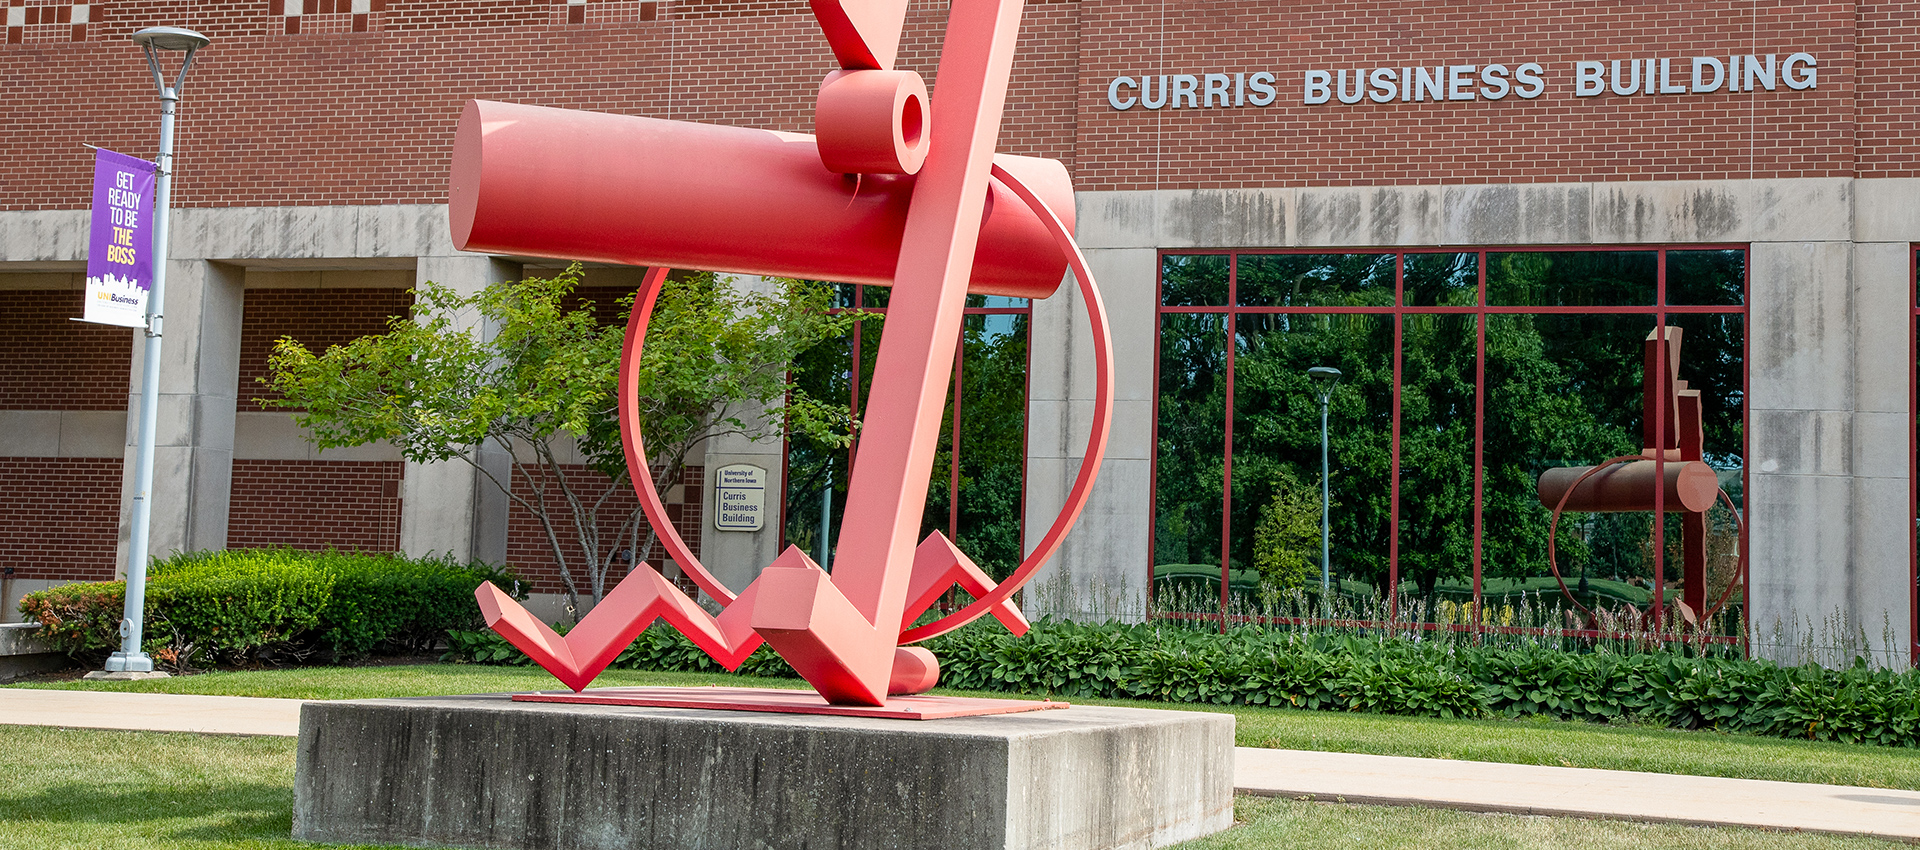 Curris Business Building with a red sculpture in front